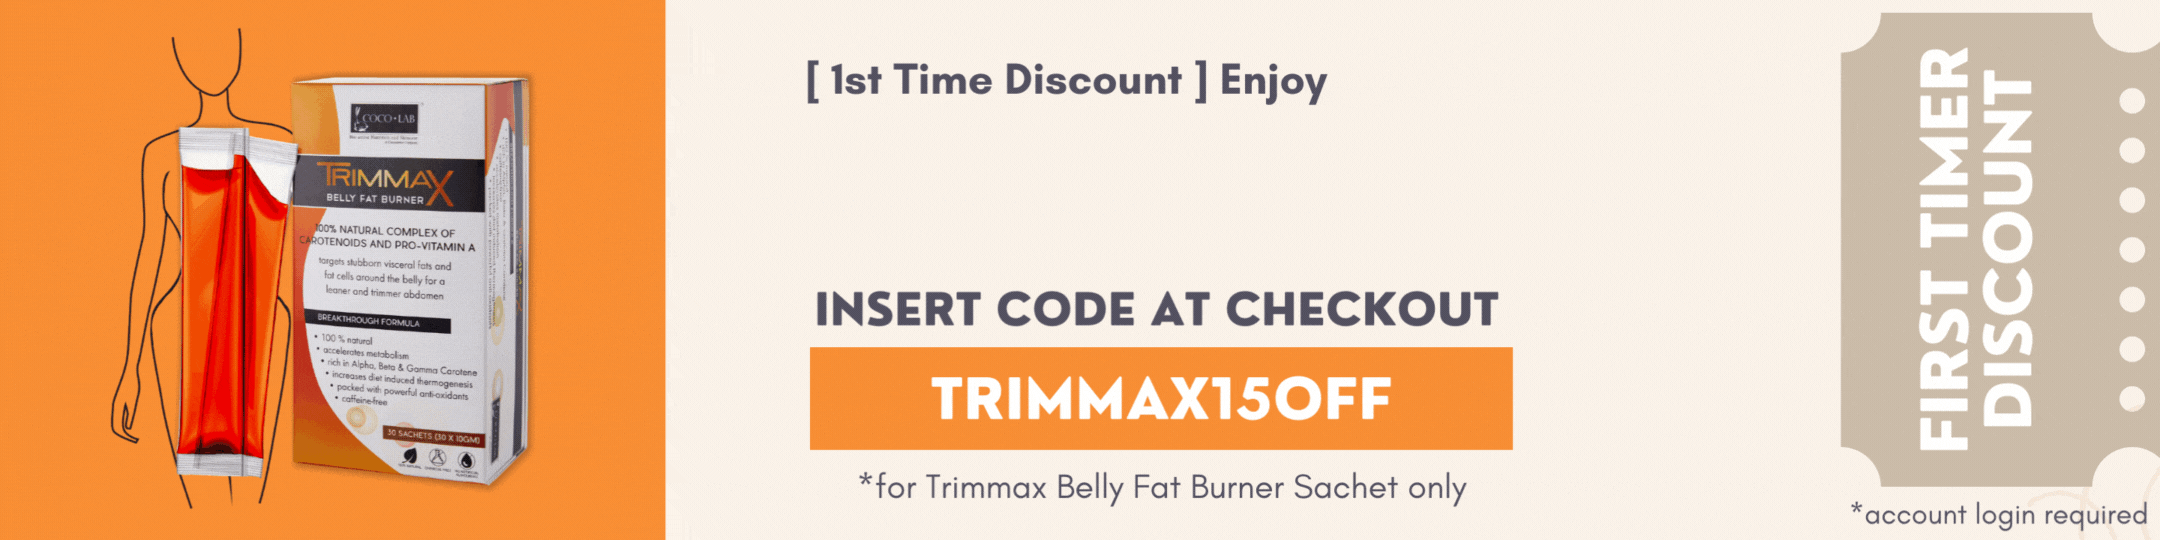 Get RM15 OFF with code TRIMMAX15OFF at COCOLAB